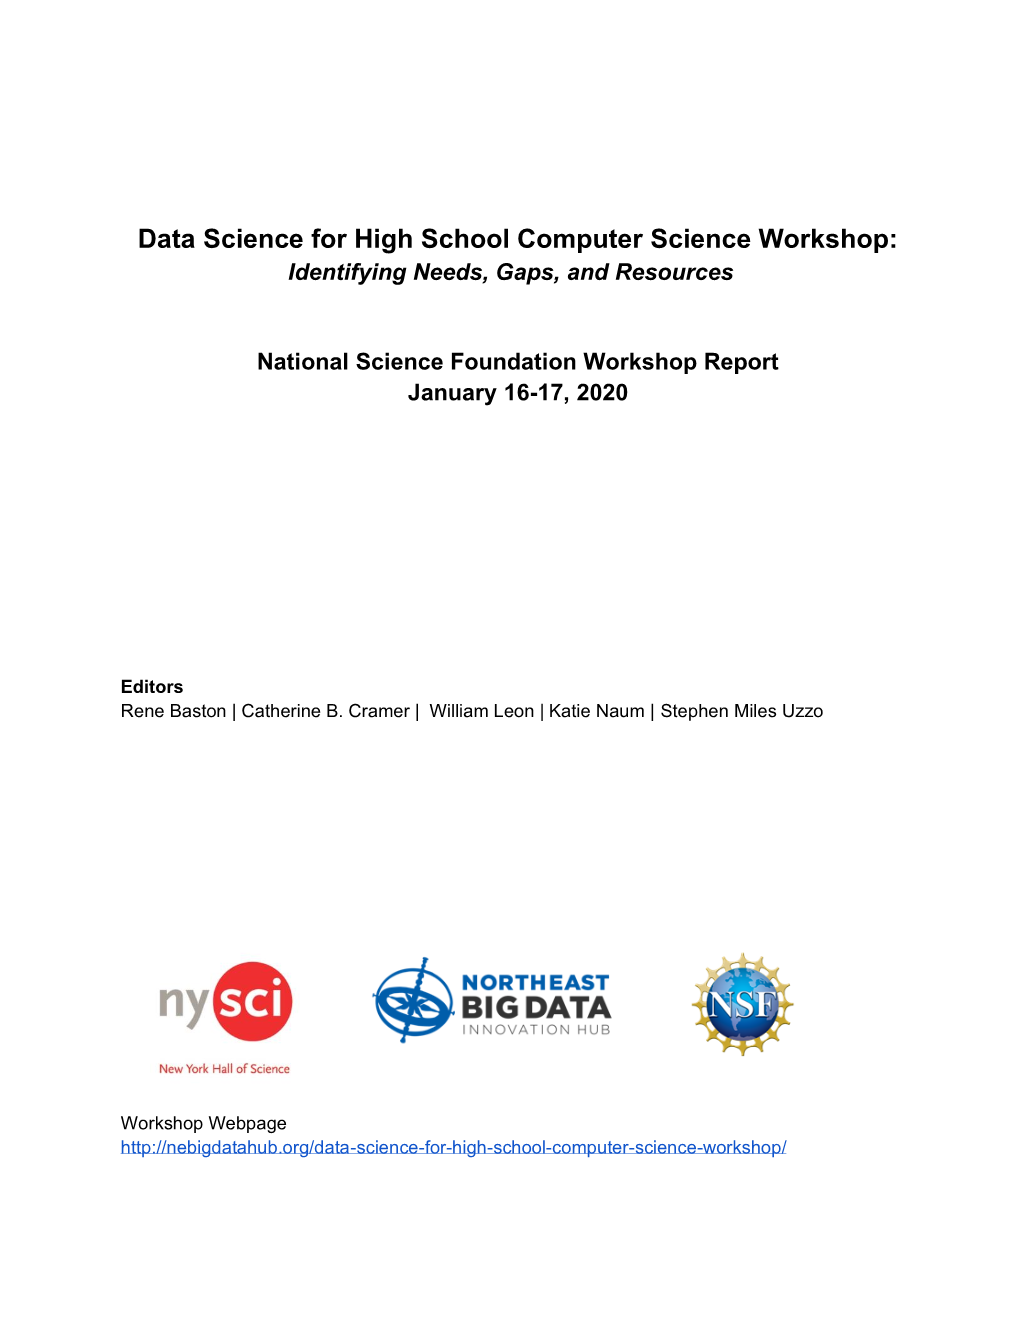 Data Science for High School Computer Science Workshop: Identifying Needs, Gaps, and Resources